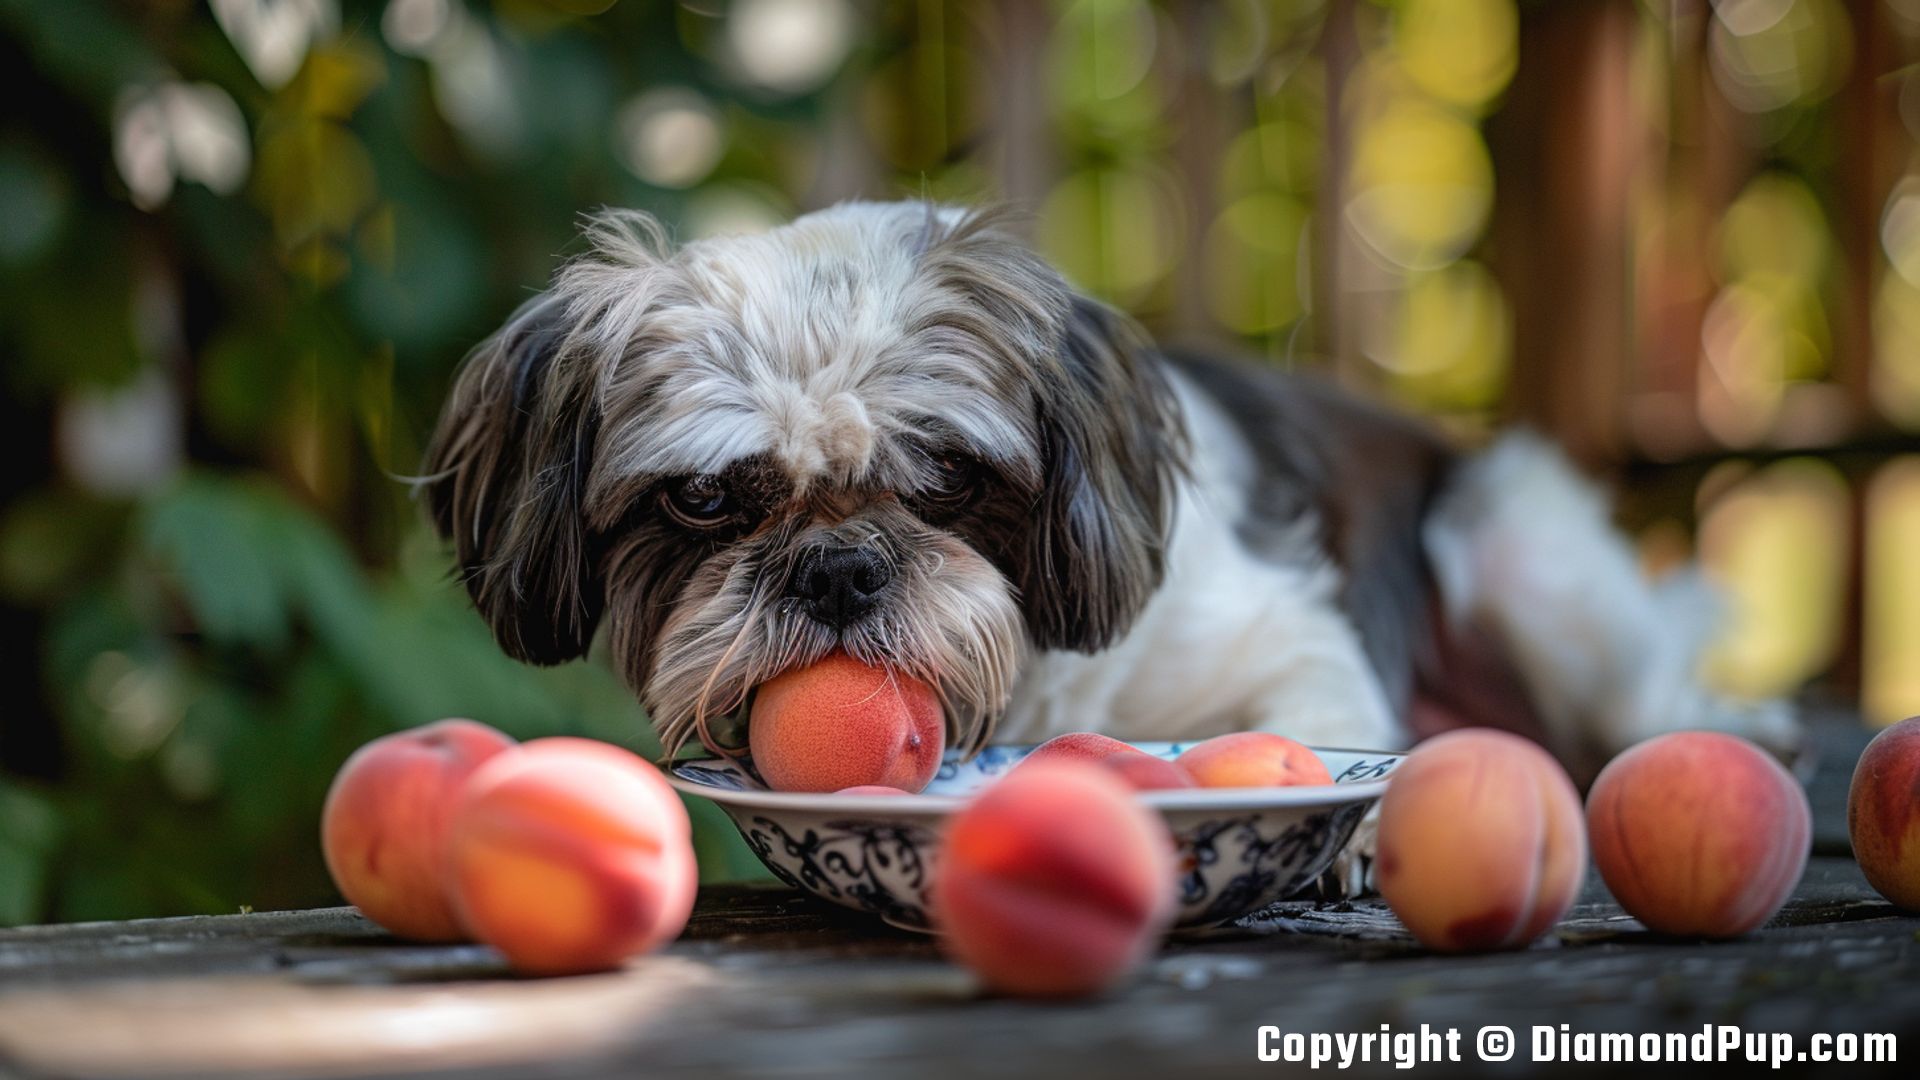 Image of a Happy Shih Tzu Eating Peaches